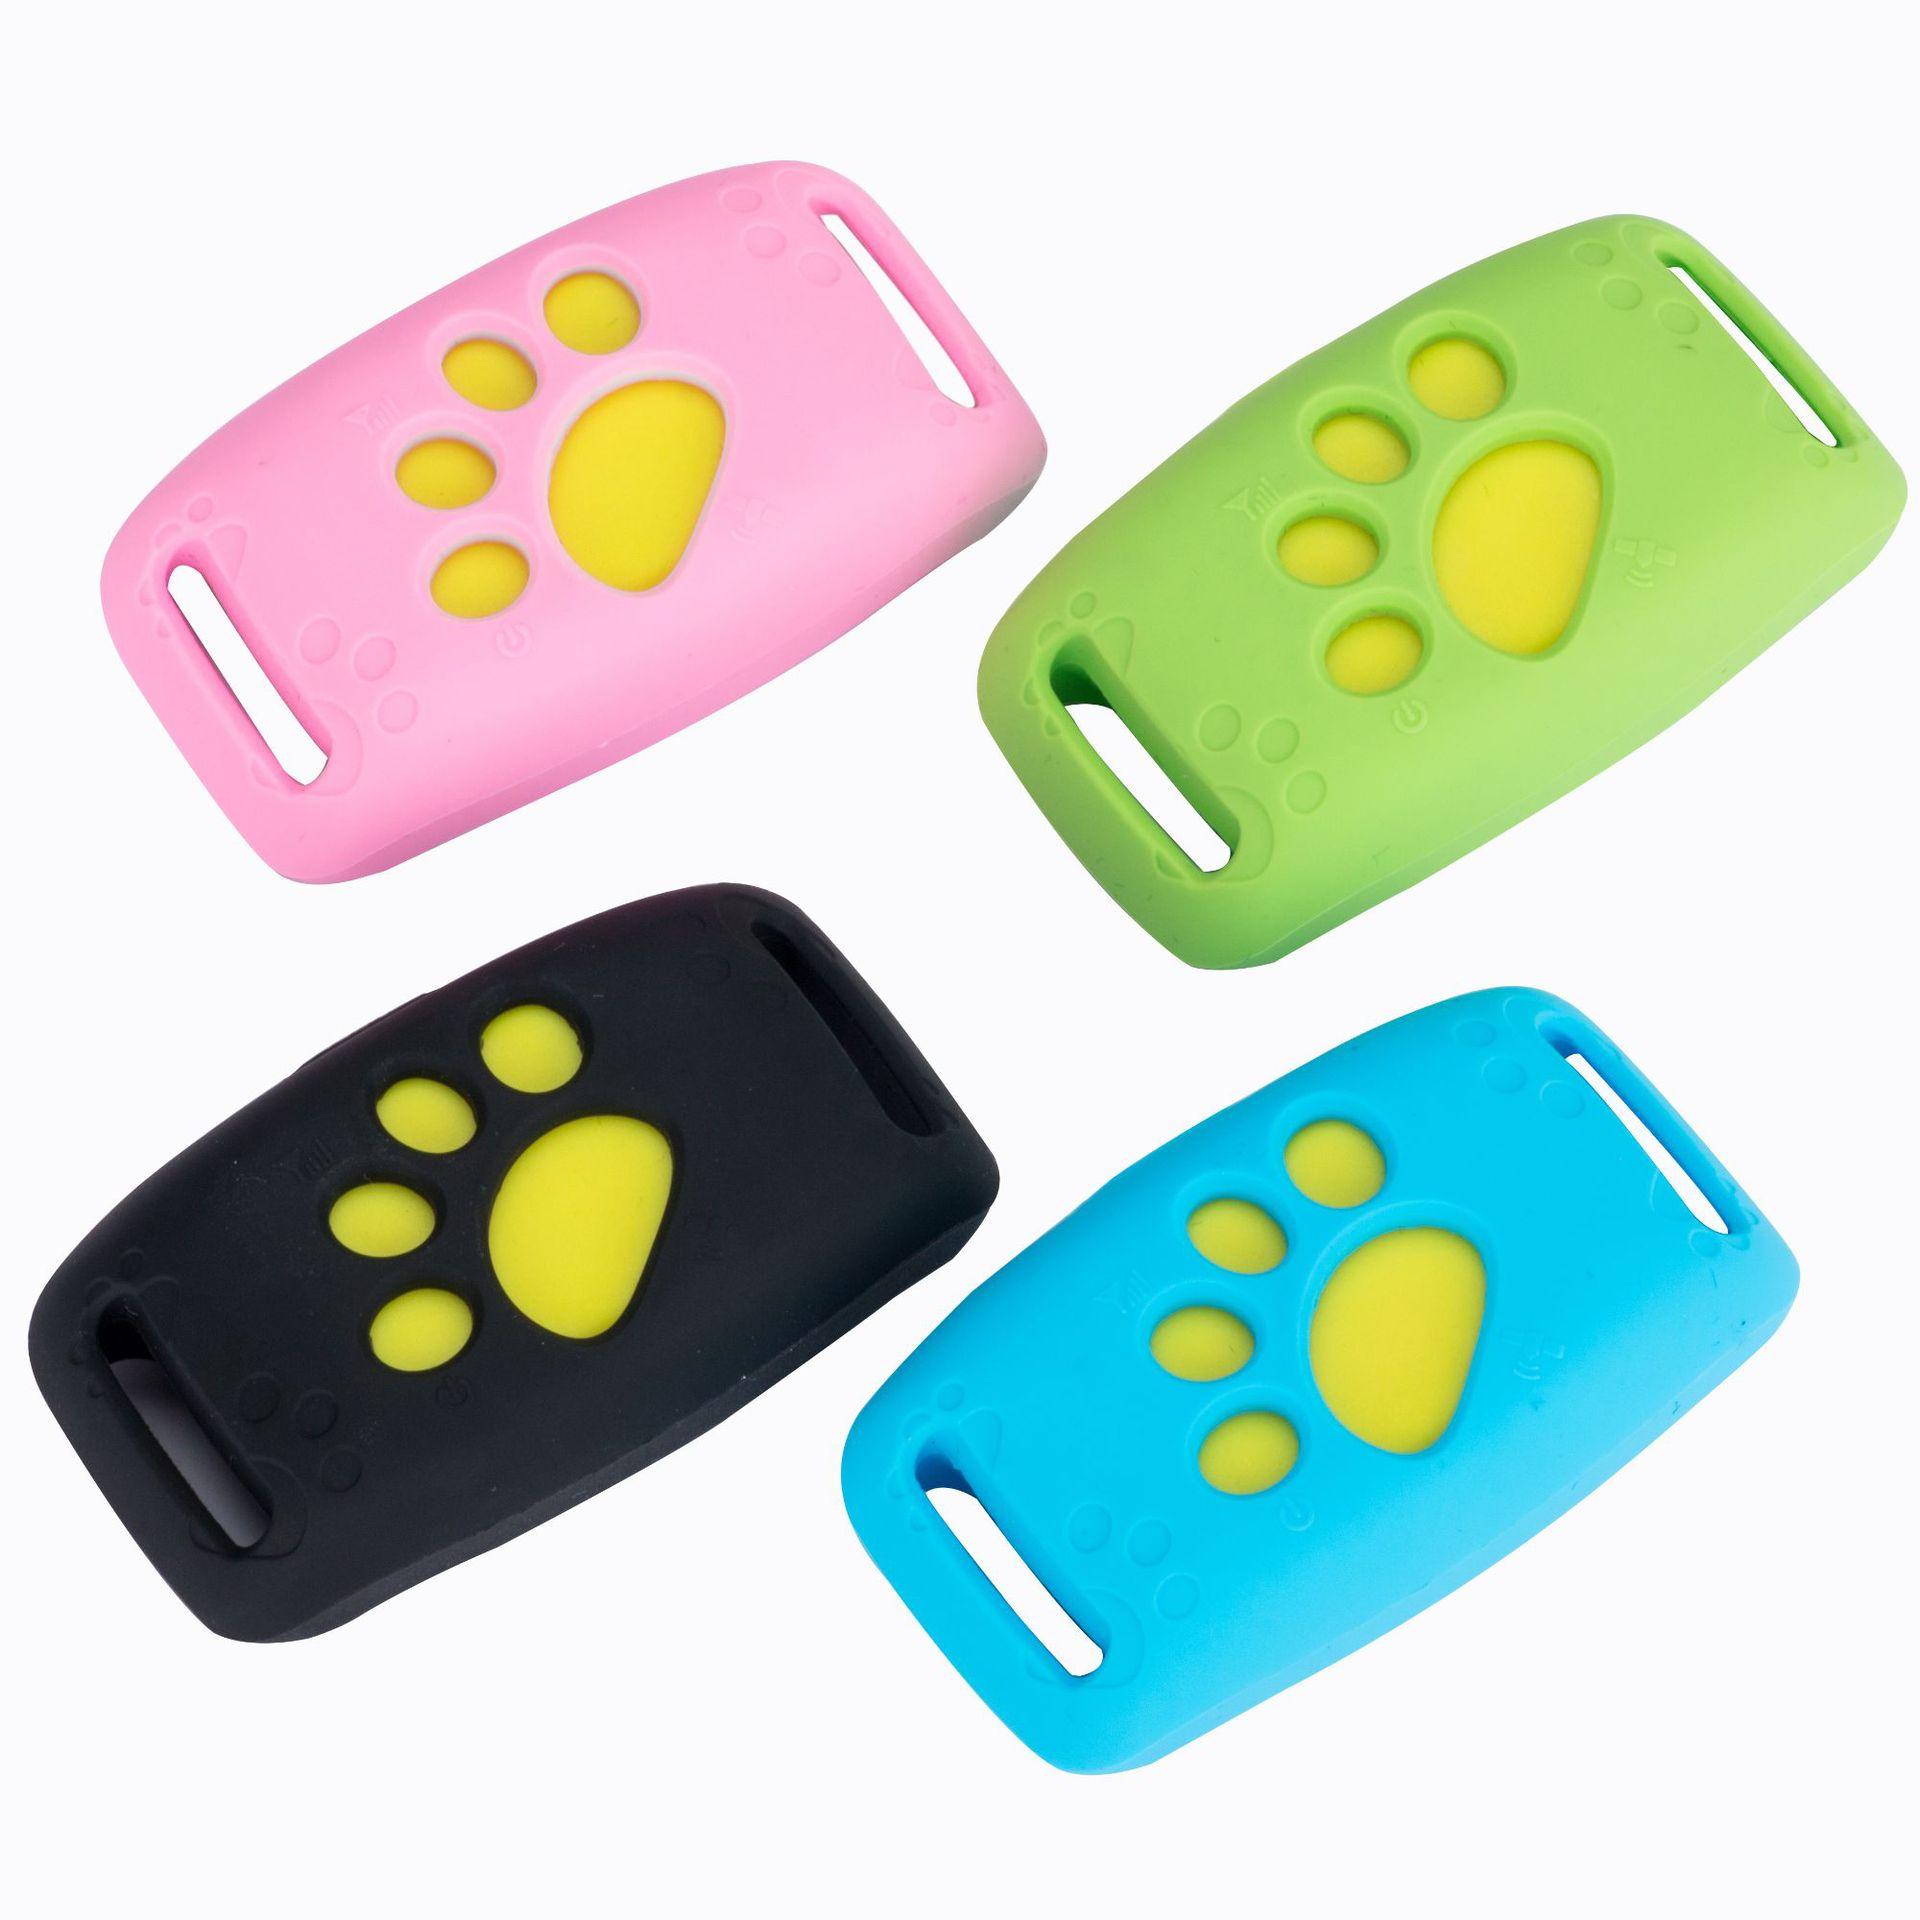 

Z8-A GSM GPRS Tracking Locator Mini GPS Tracker with Light Waterproof Pet Collar for Pets Dogs Cats Cattle Sheep